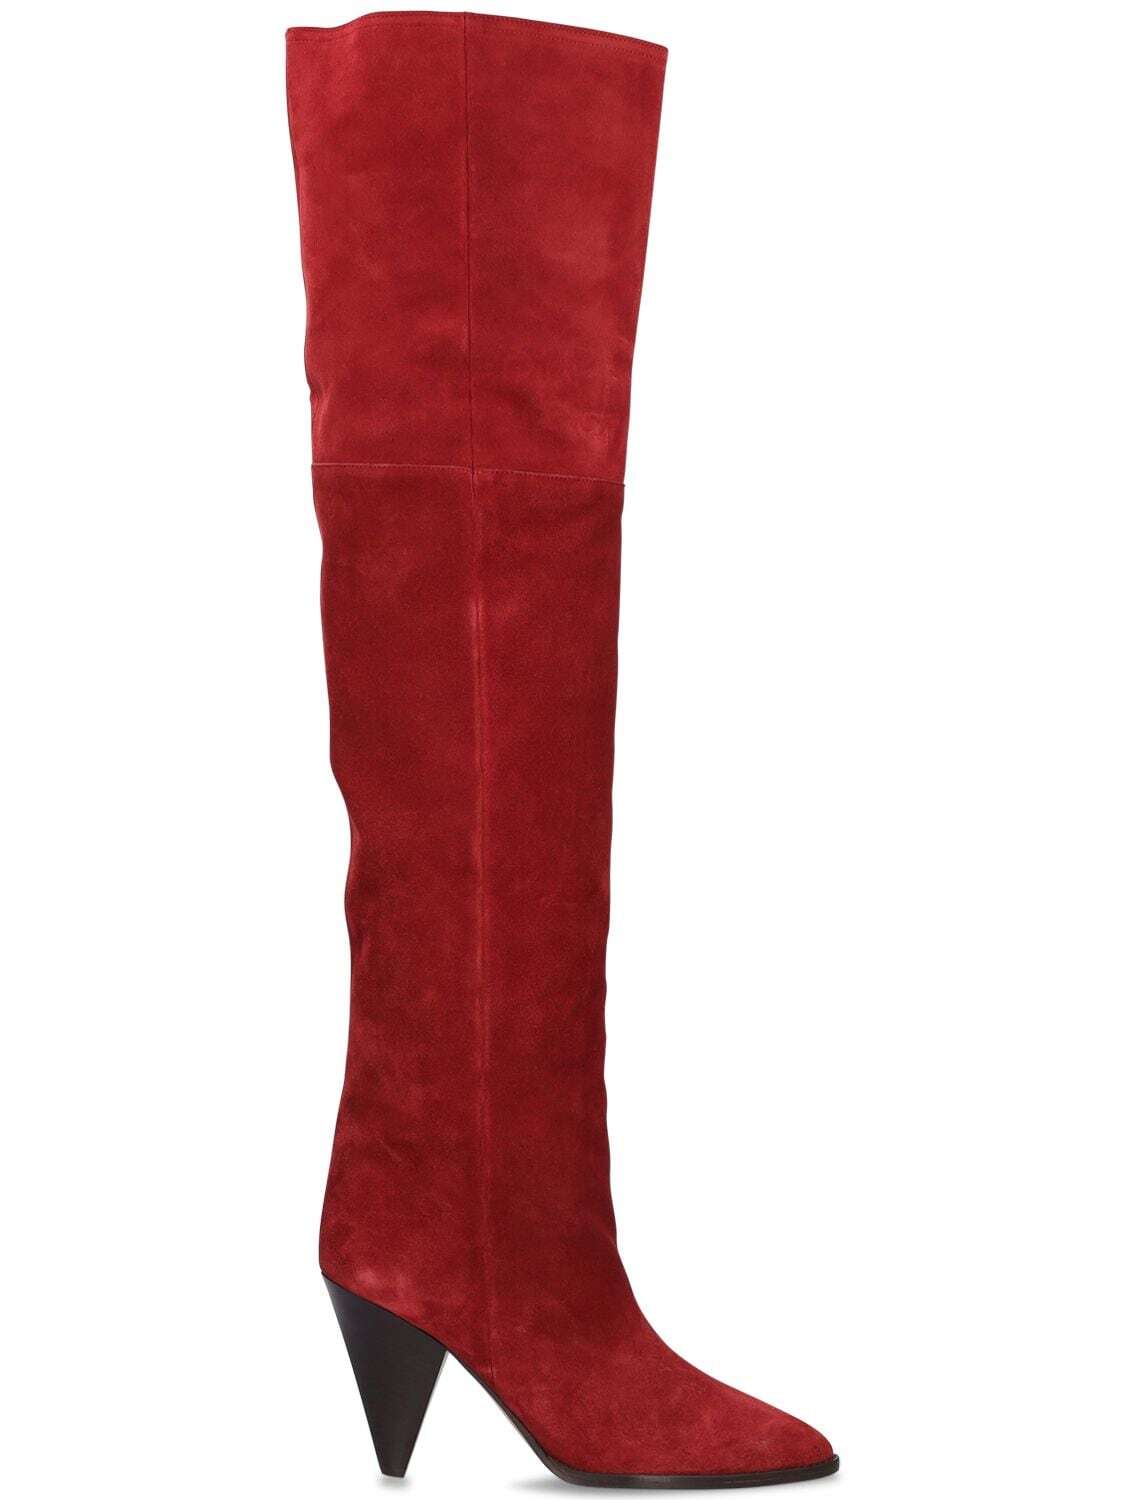 ISABEL MARANT 90mm Riria Suede Over-the-knee Boots in red